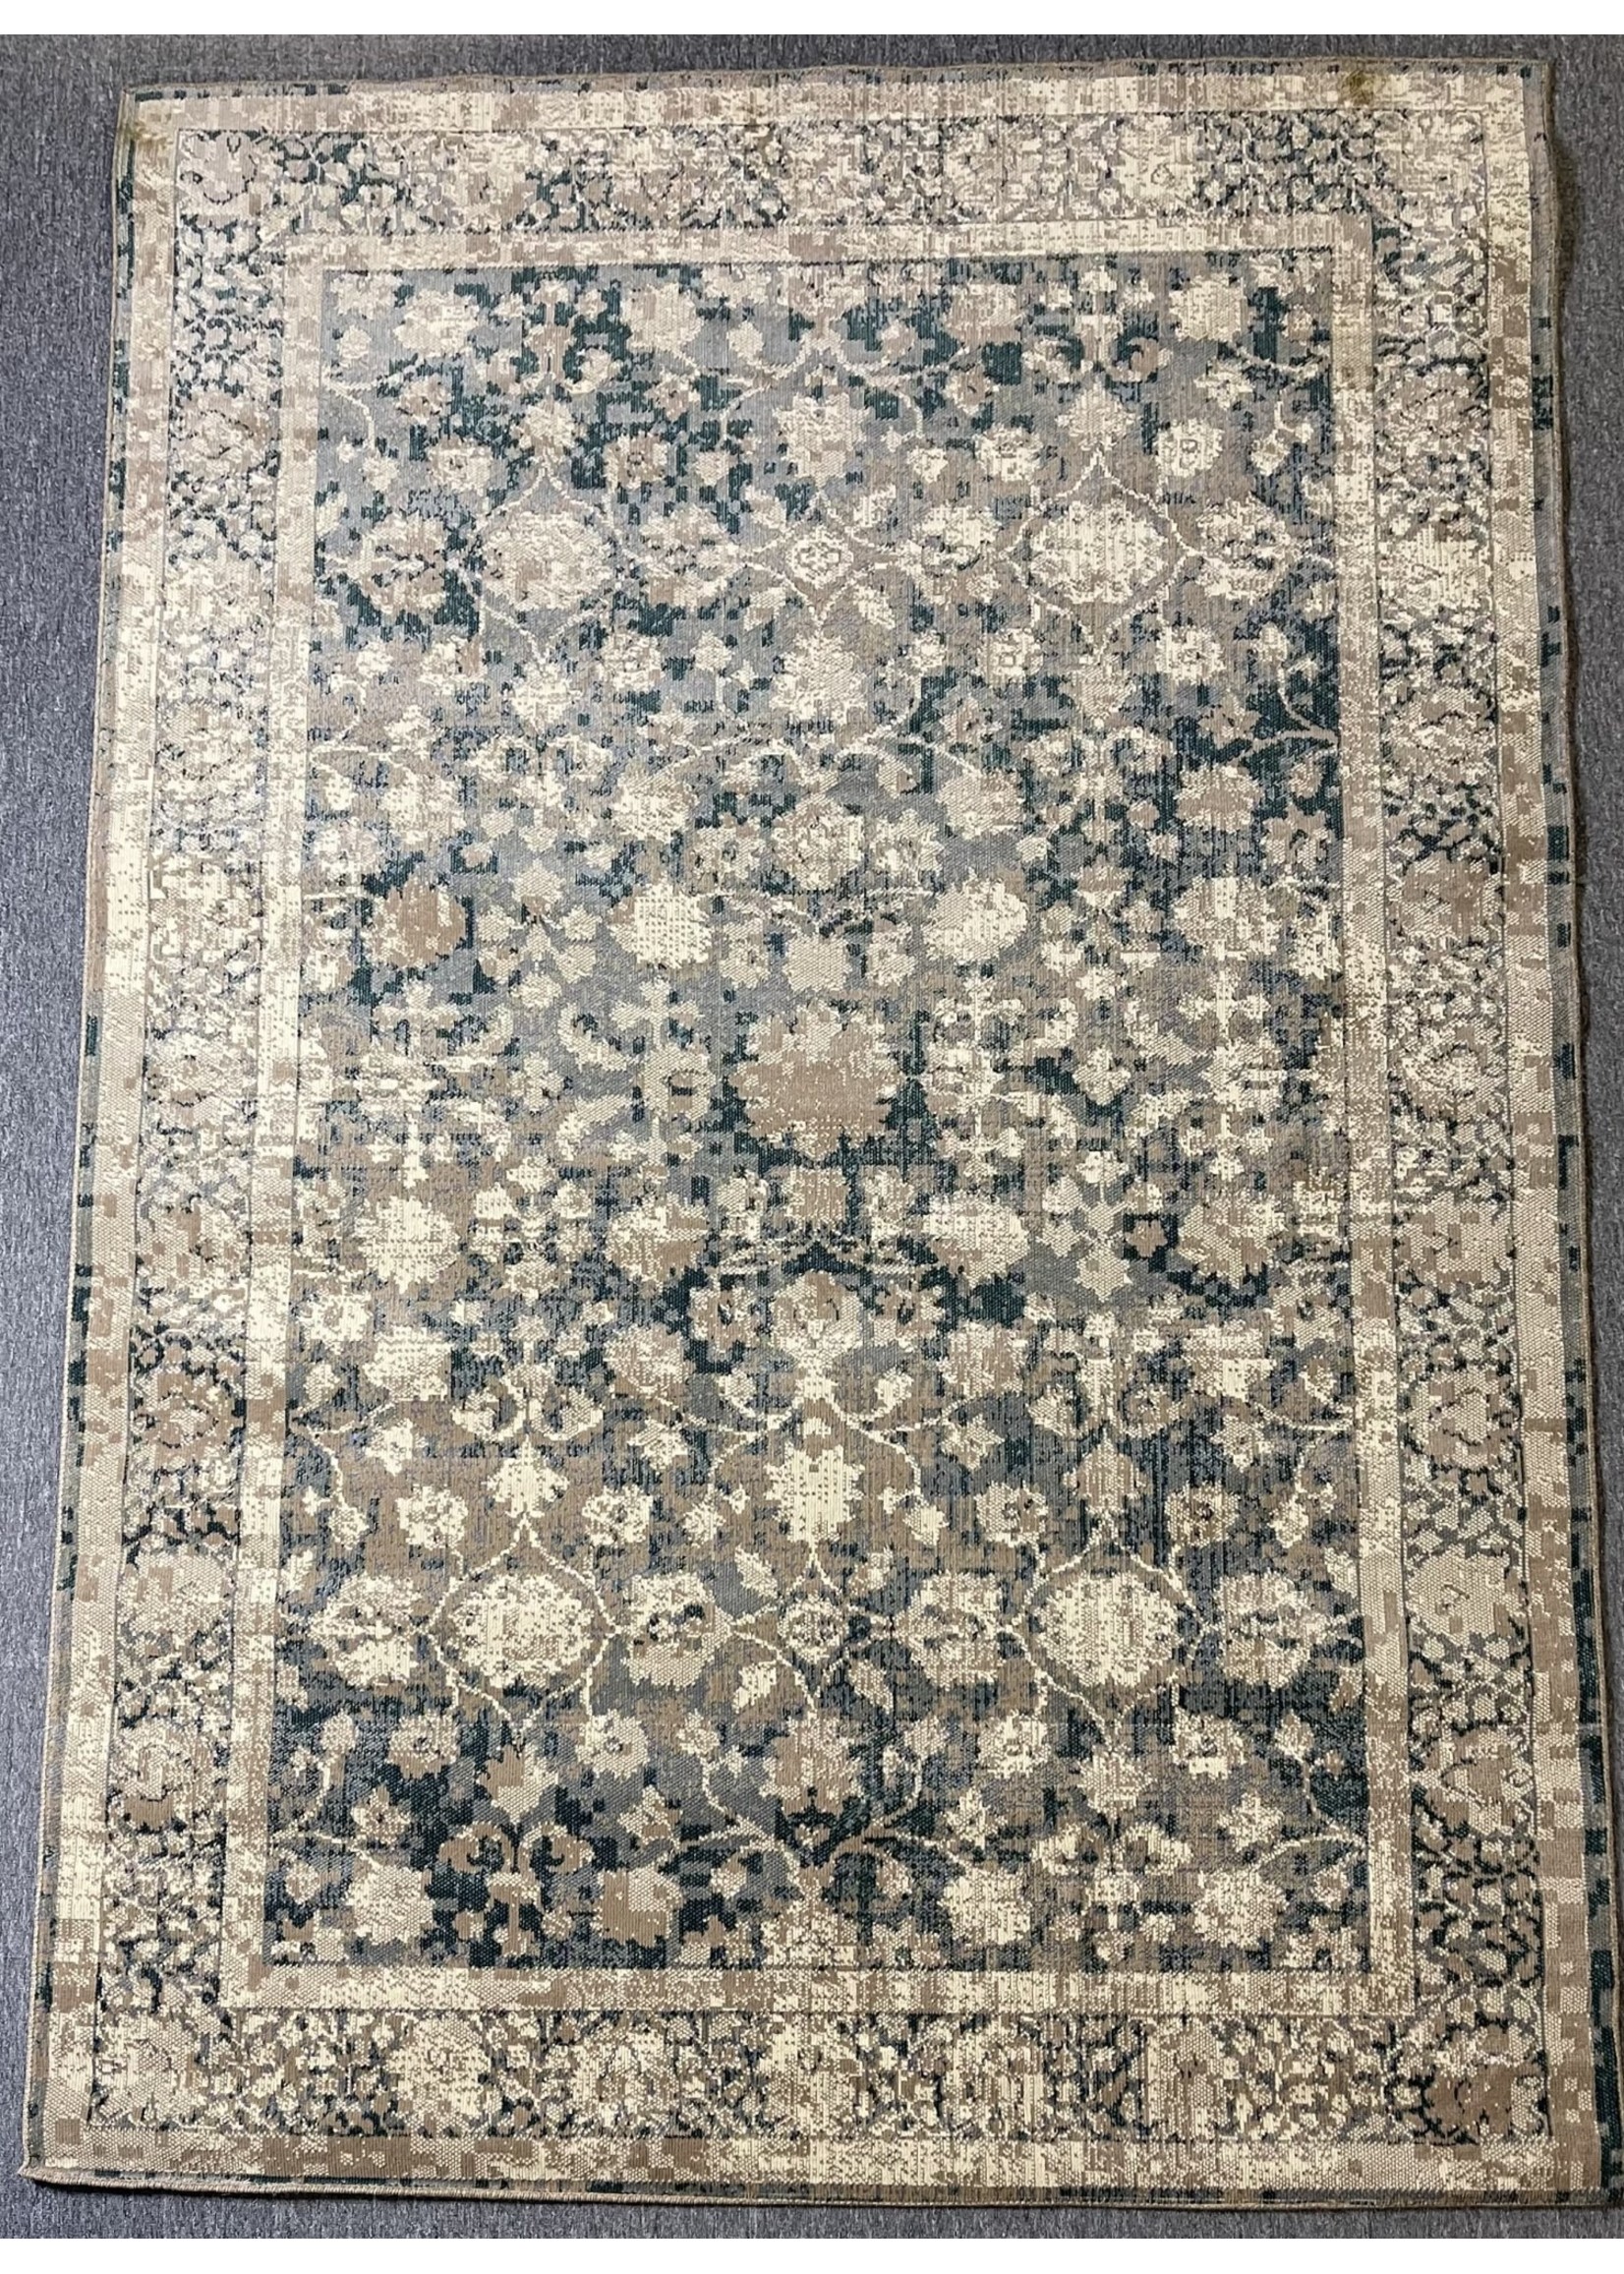 MAYBERRY CARPET HEIRLOOM 5X8 AREA RUG